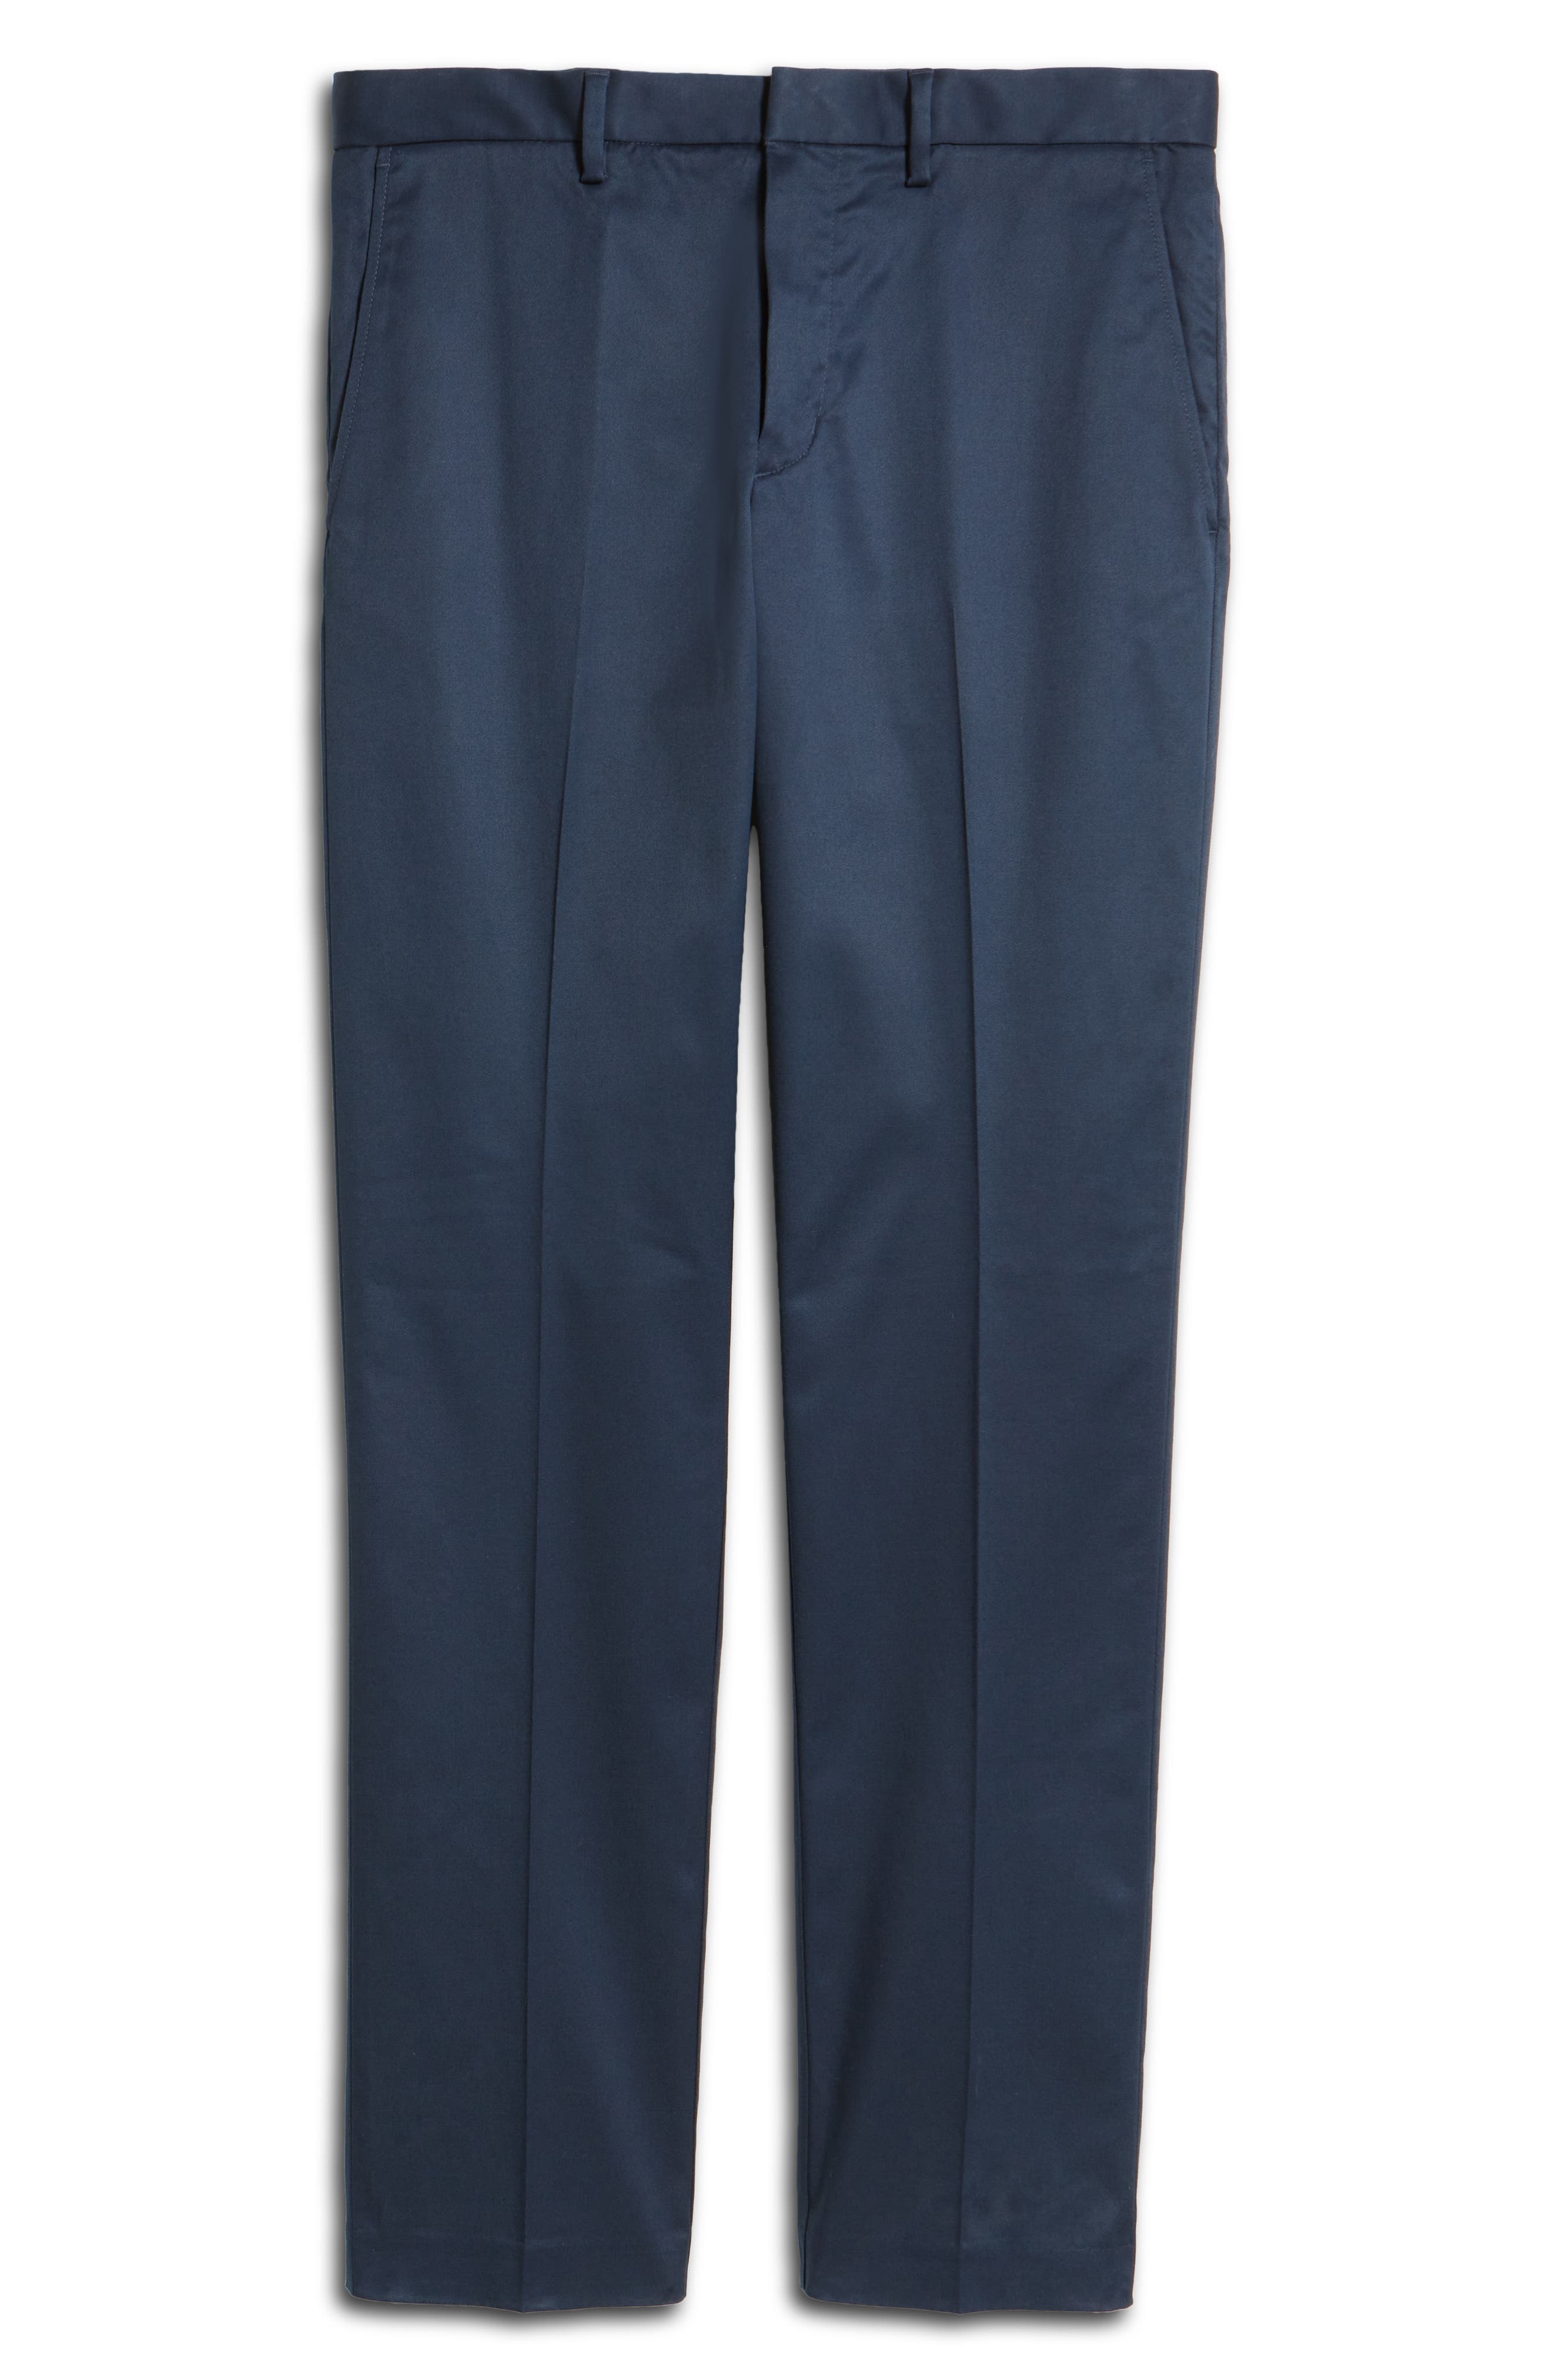 Nordstrom Slim Fit Non Iron Chinos, $69 | Nordstrom | Lookastic